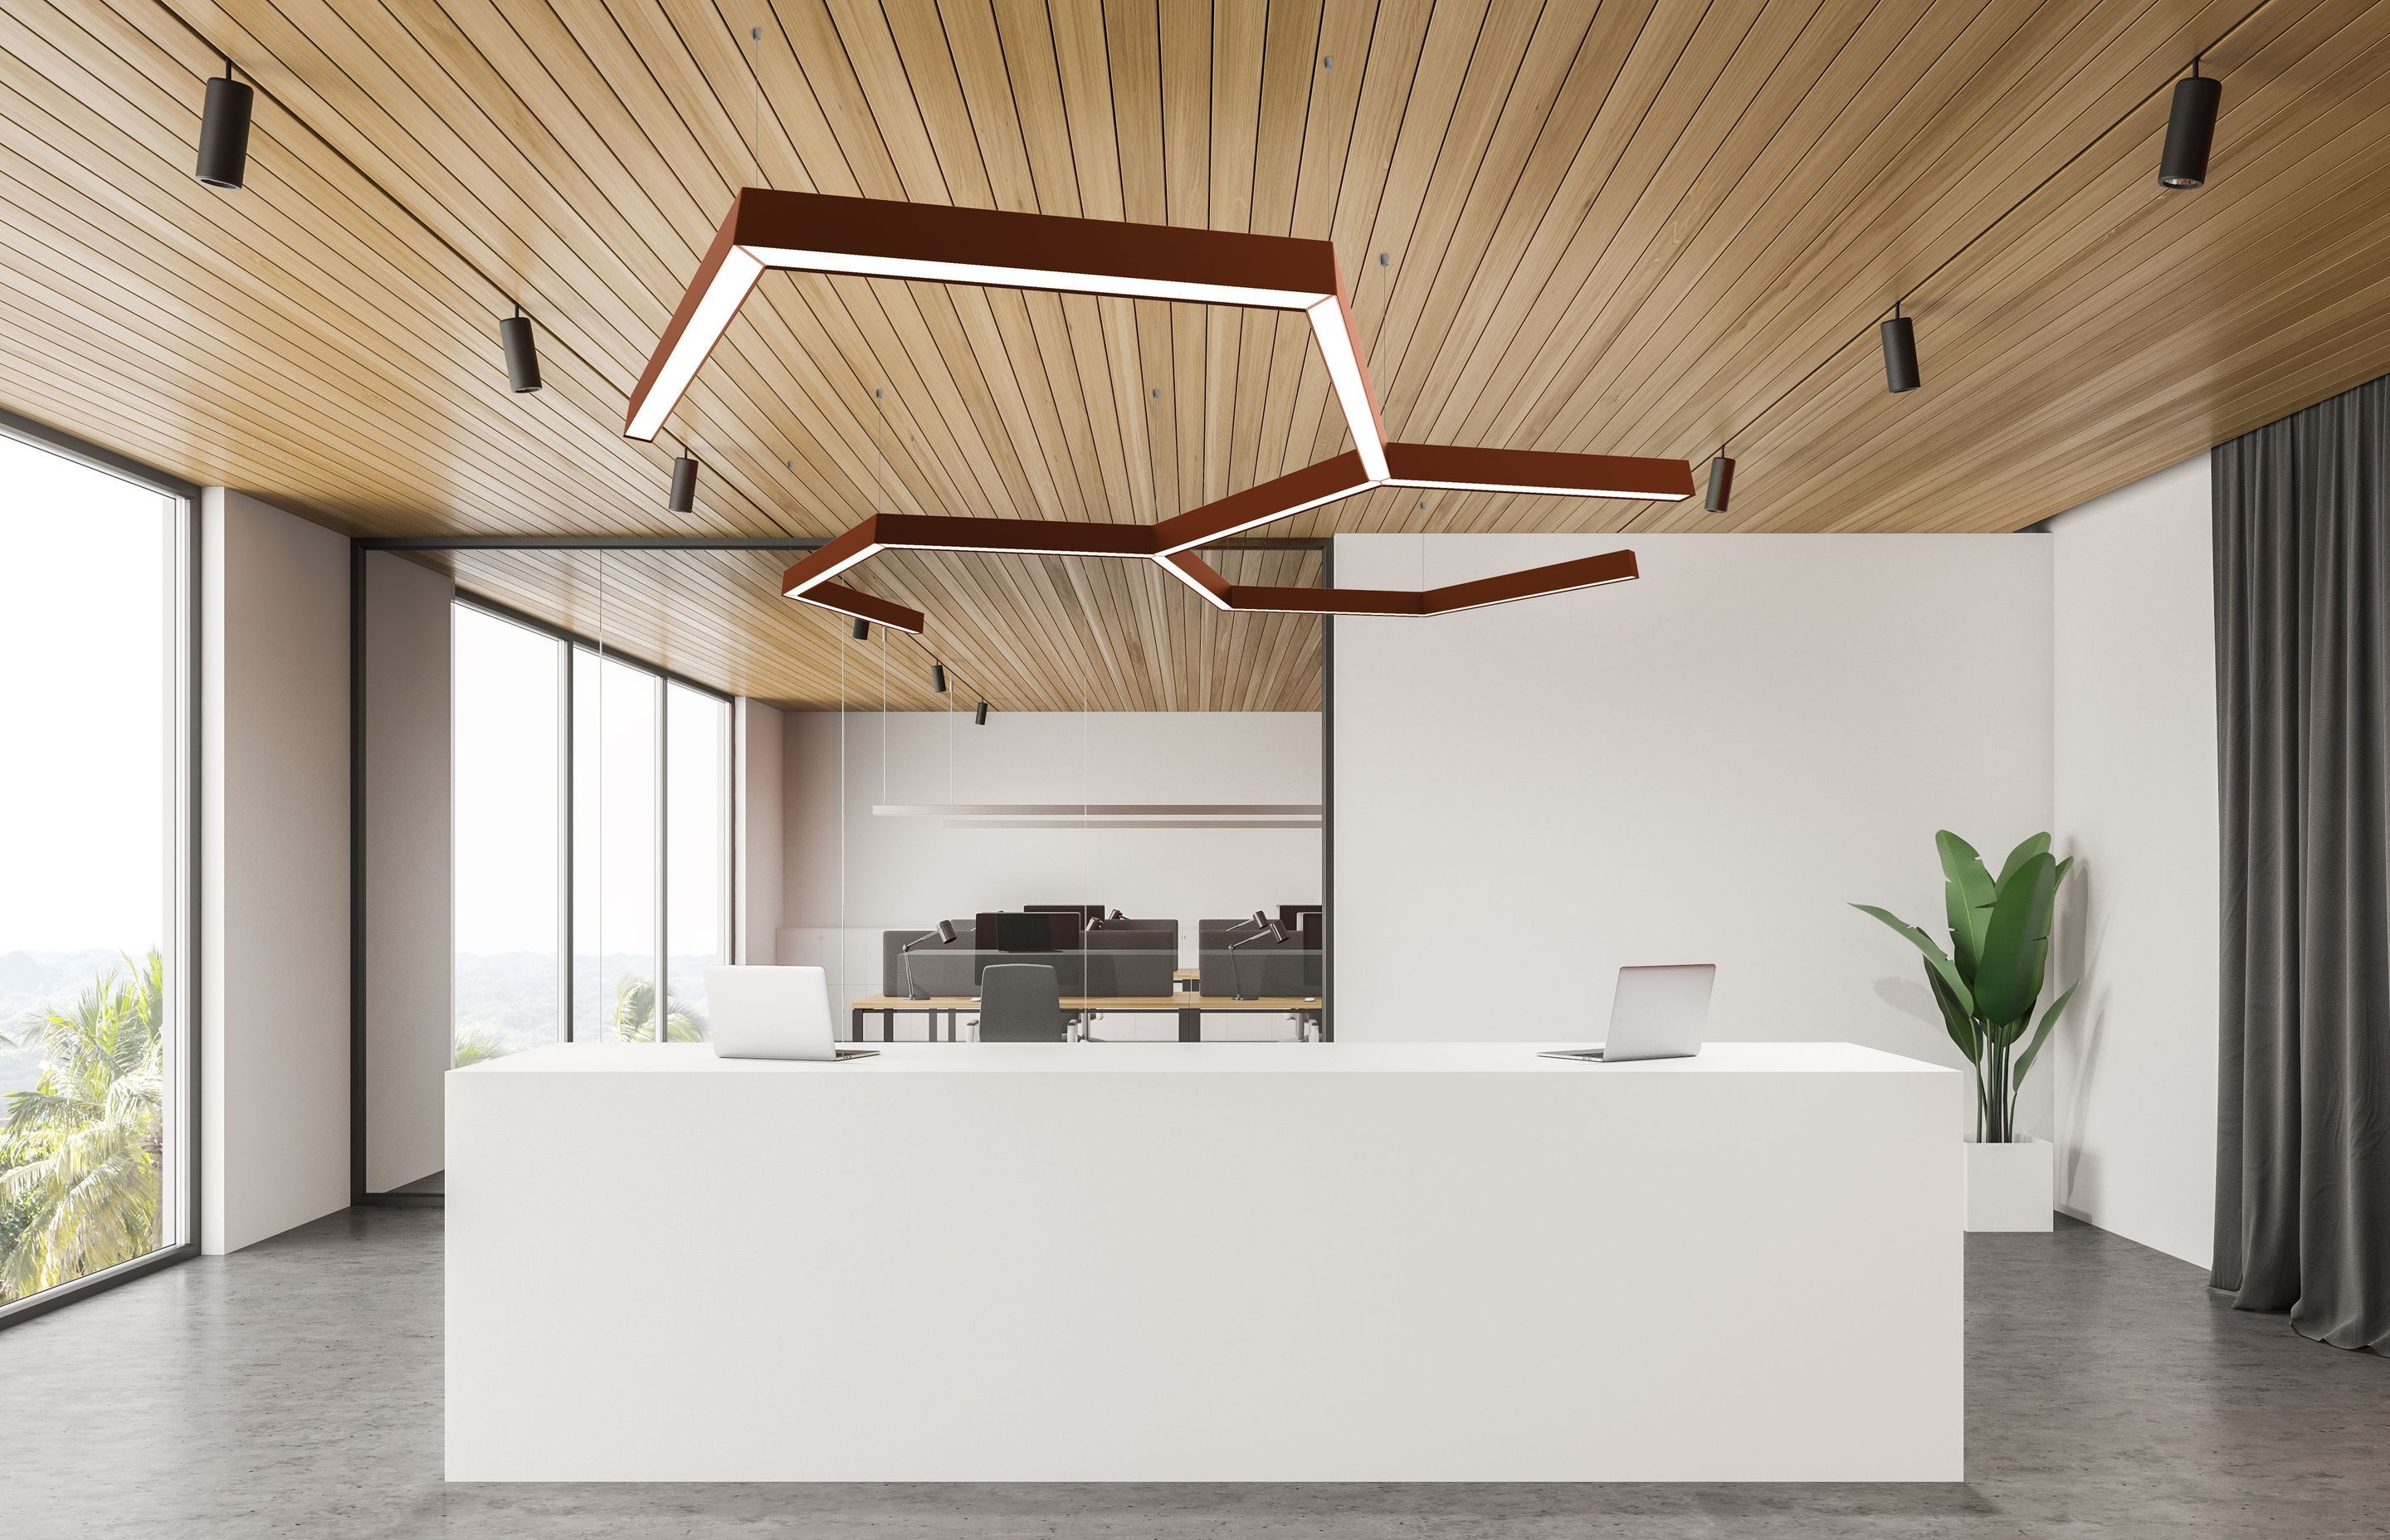 The highline 05 100mm luminaires slot into the joiners, meaning endless possibilities for configurations.